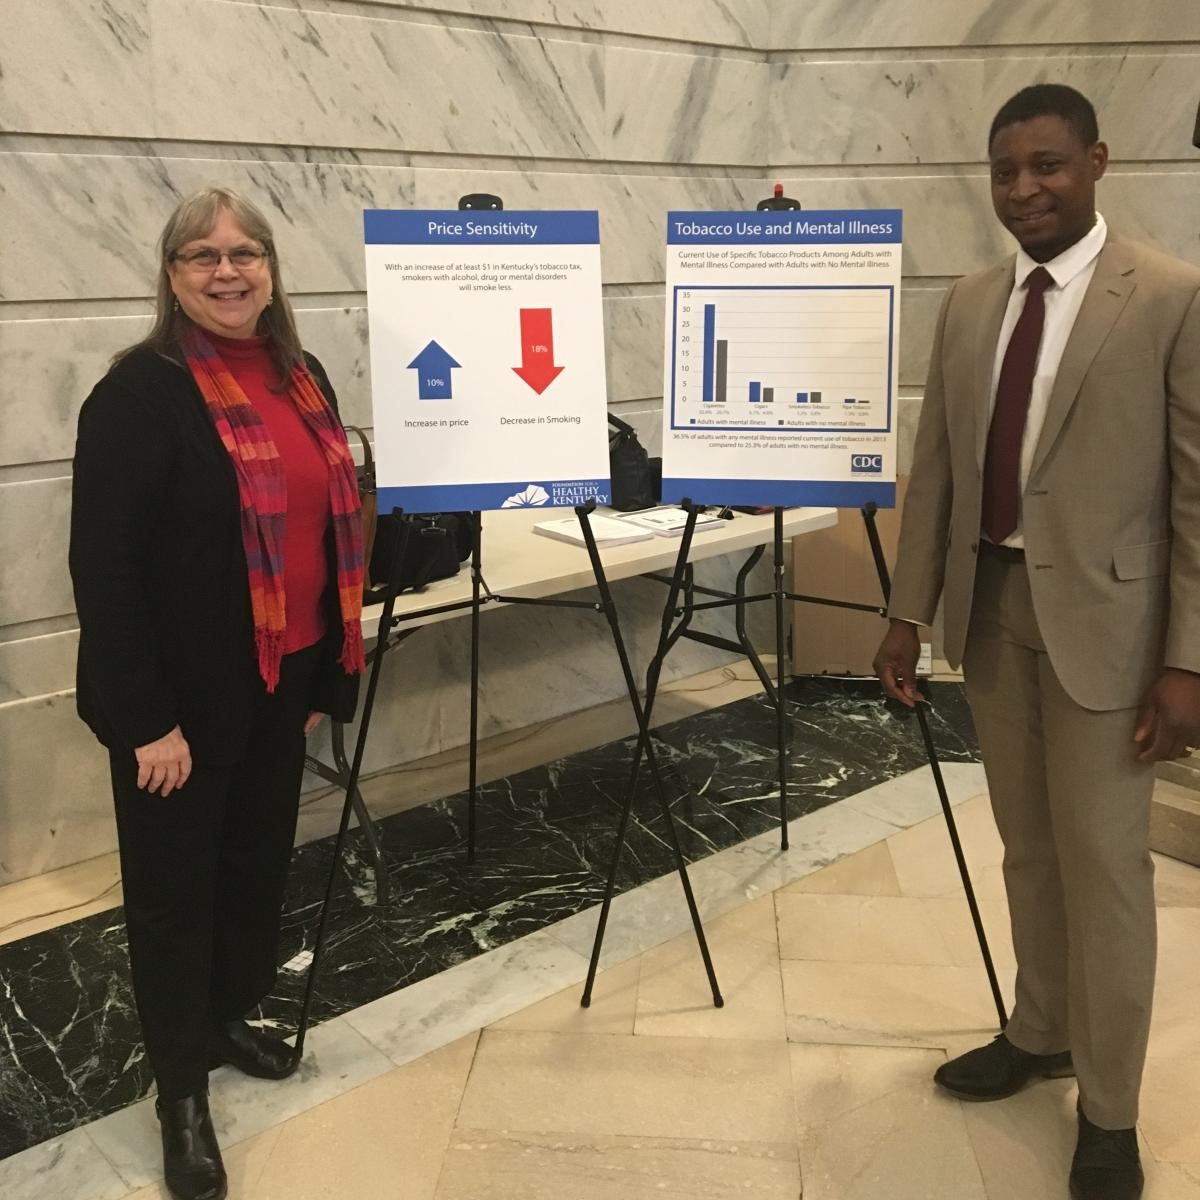 Zim Okoli and Audrey Darville photographed at the Cigarette Tax Event